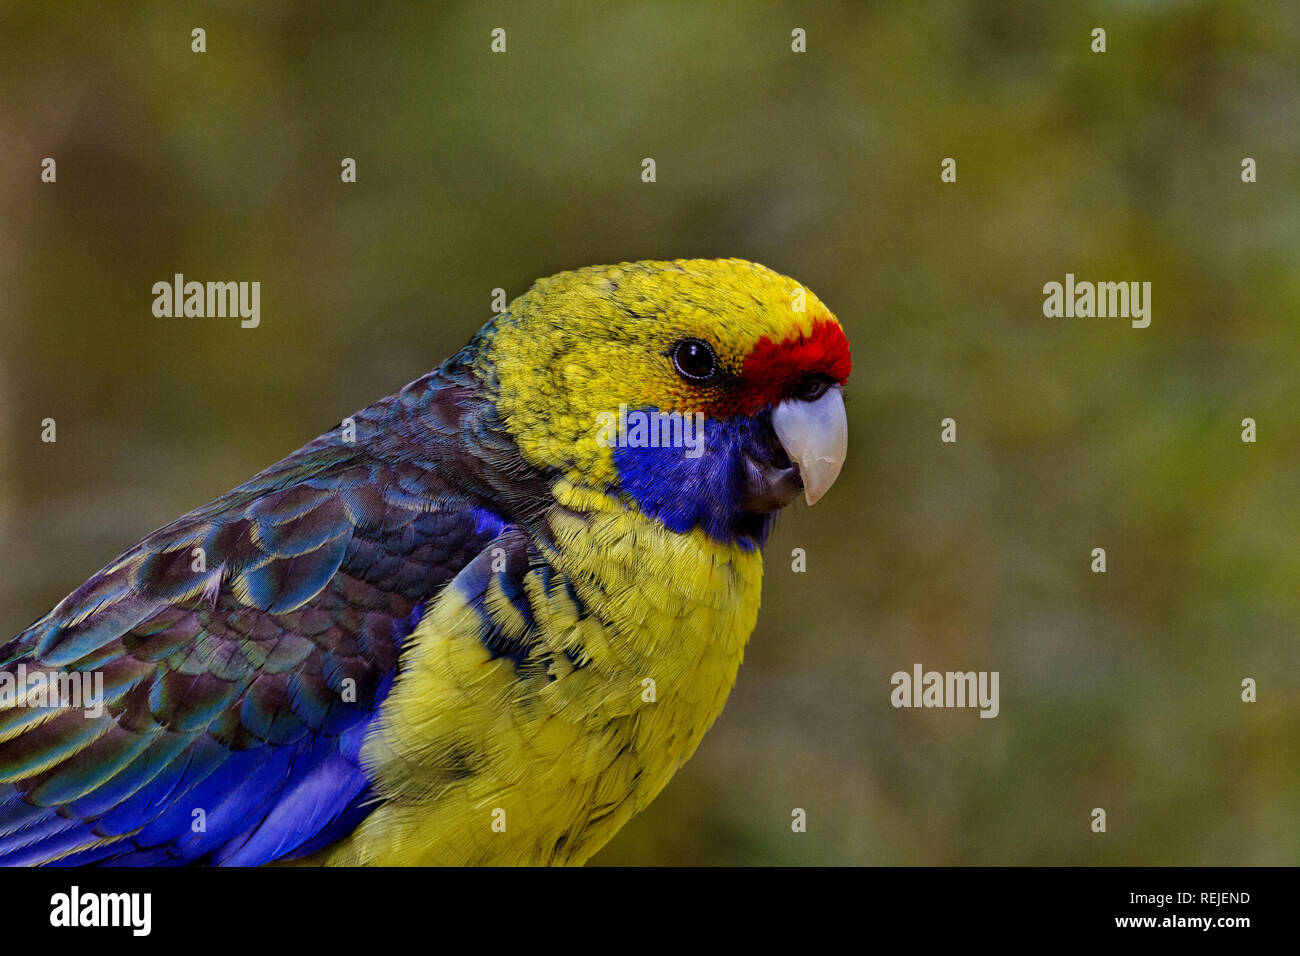 Green Rosella Parrot with copy space in bokeh background. Location is Tasmania, Australia. Stock Photo